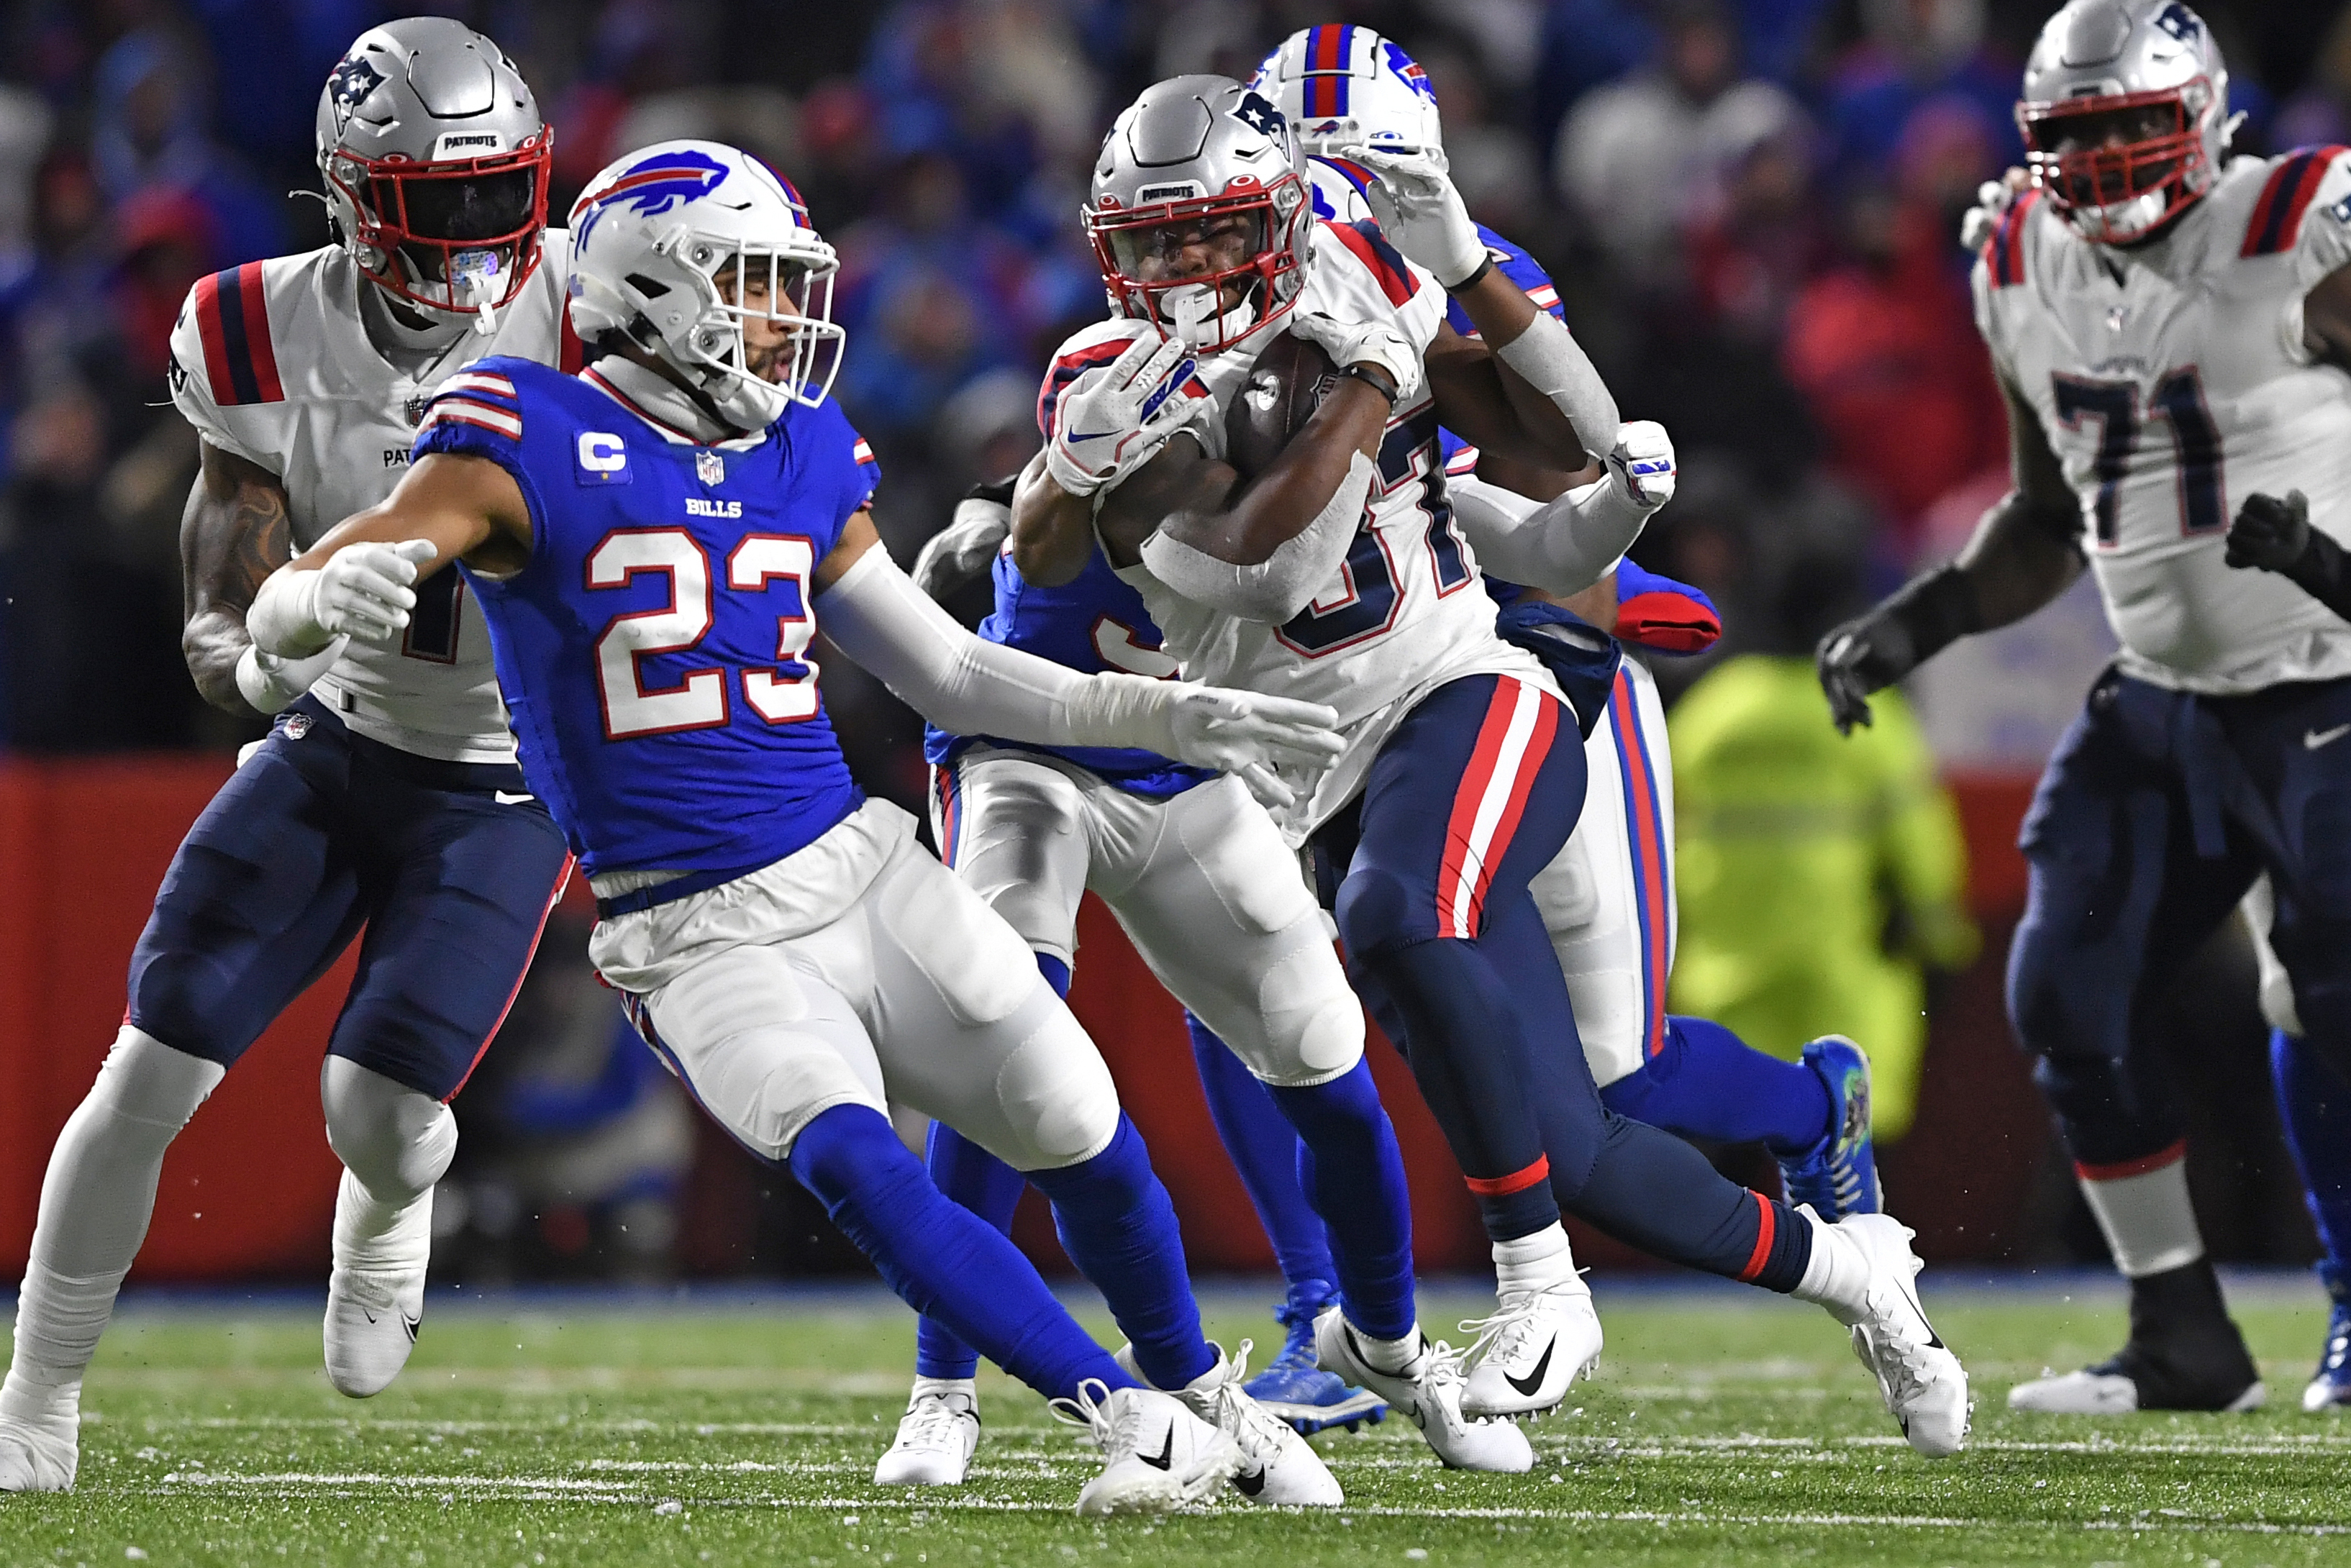 Patriots run to gritty 14-10 win over Bills on Monday Night Football to  take control of AFC East